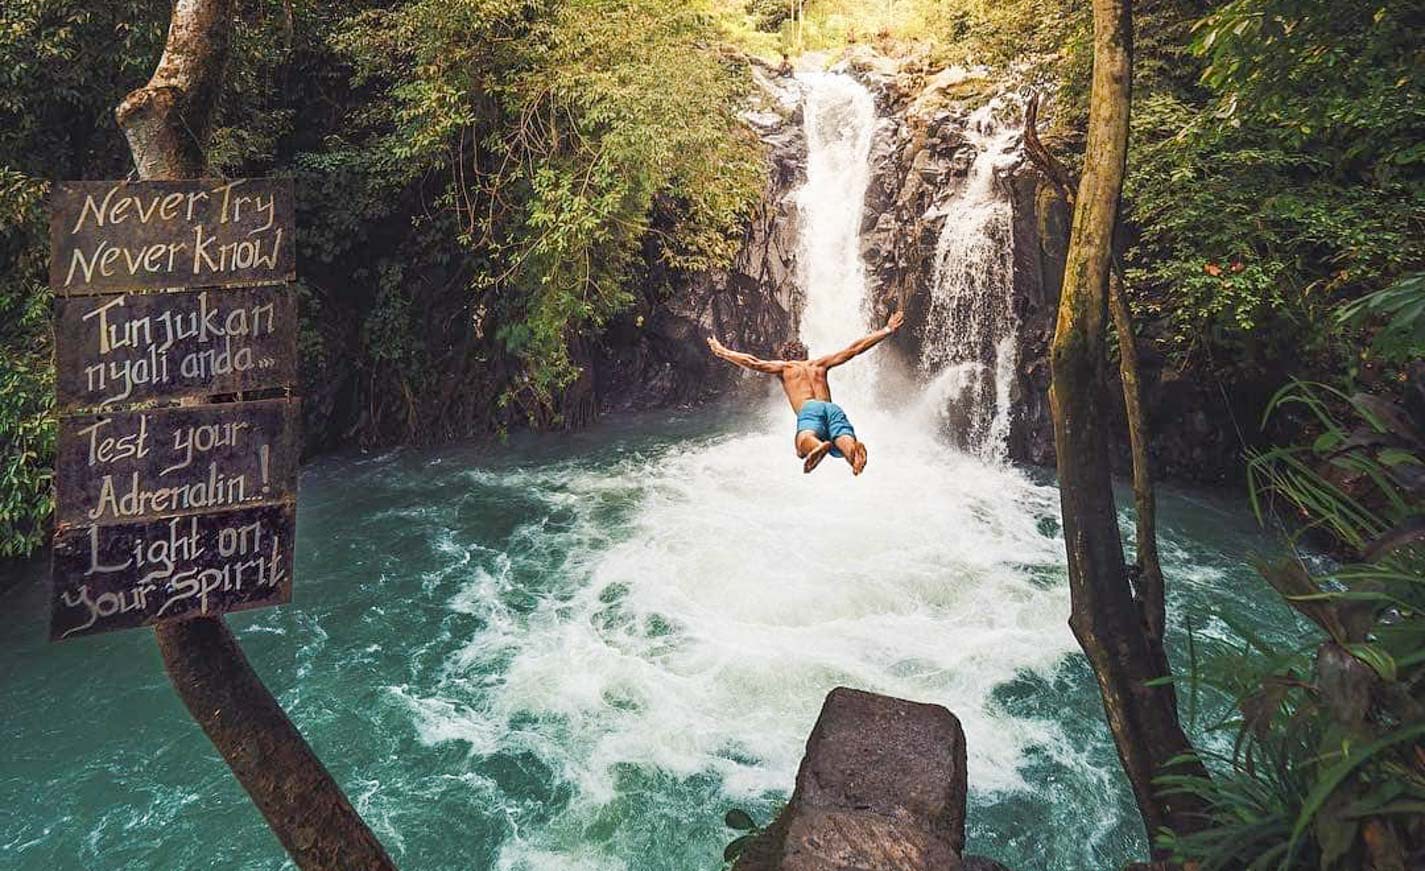 Featured - Kroya Waterfall Aling Aling Cliff Dive things to do in Bali